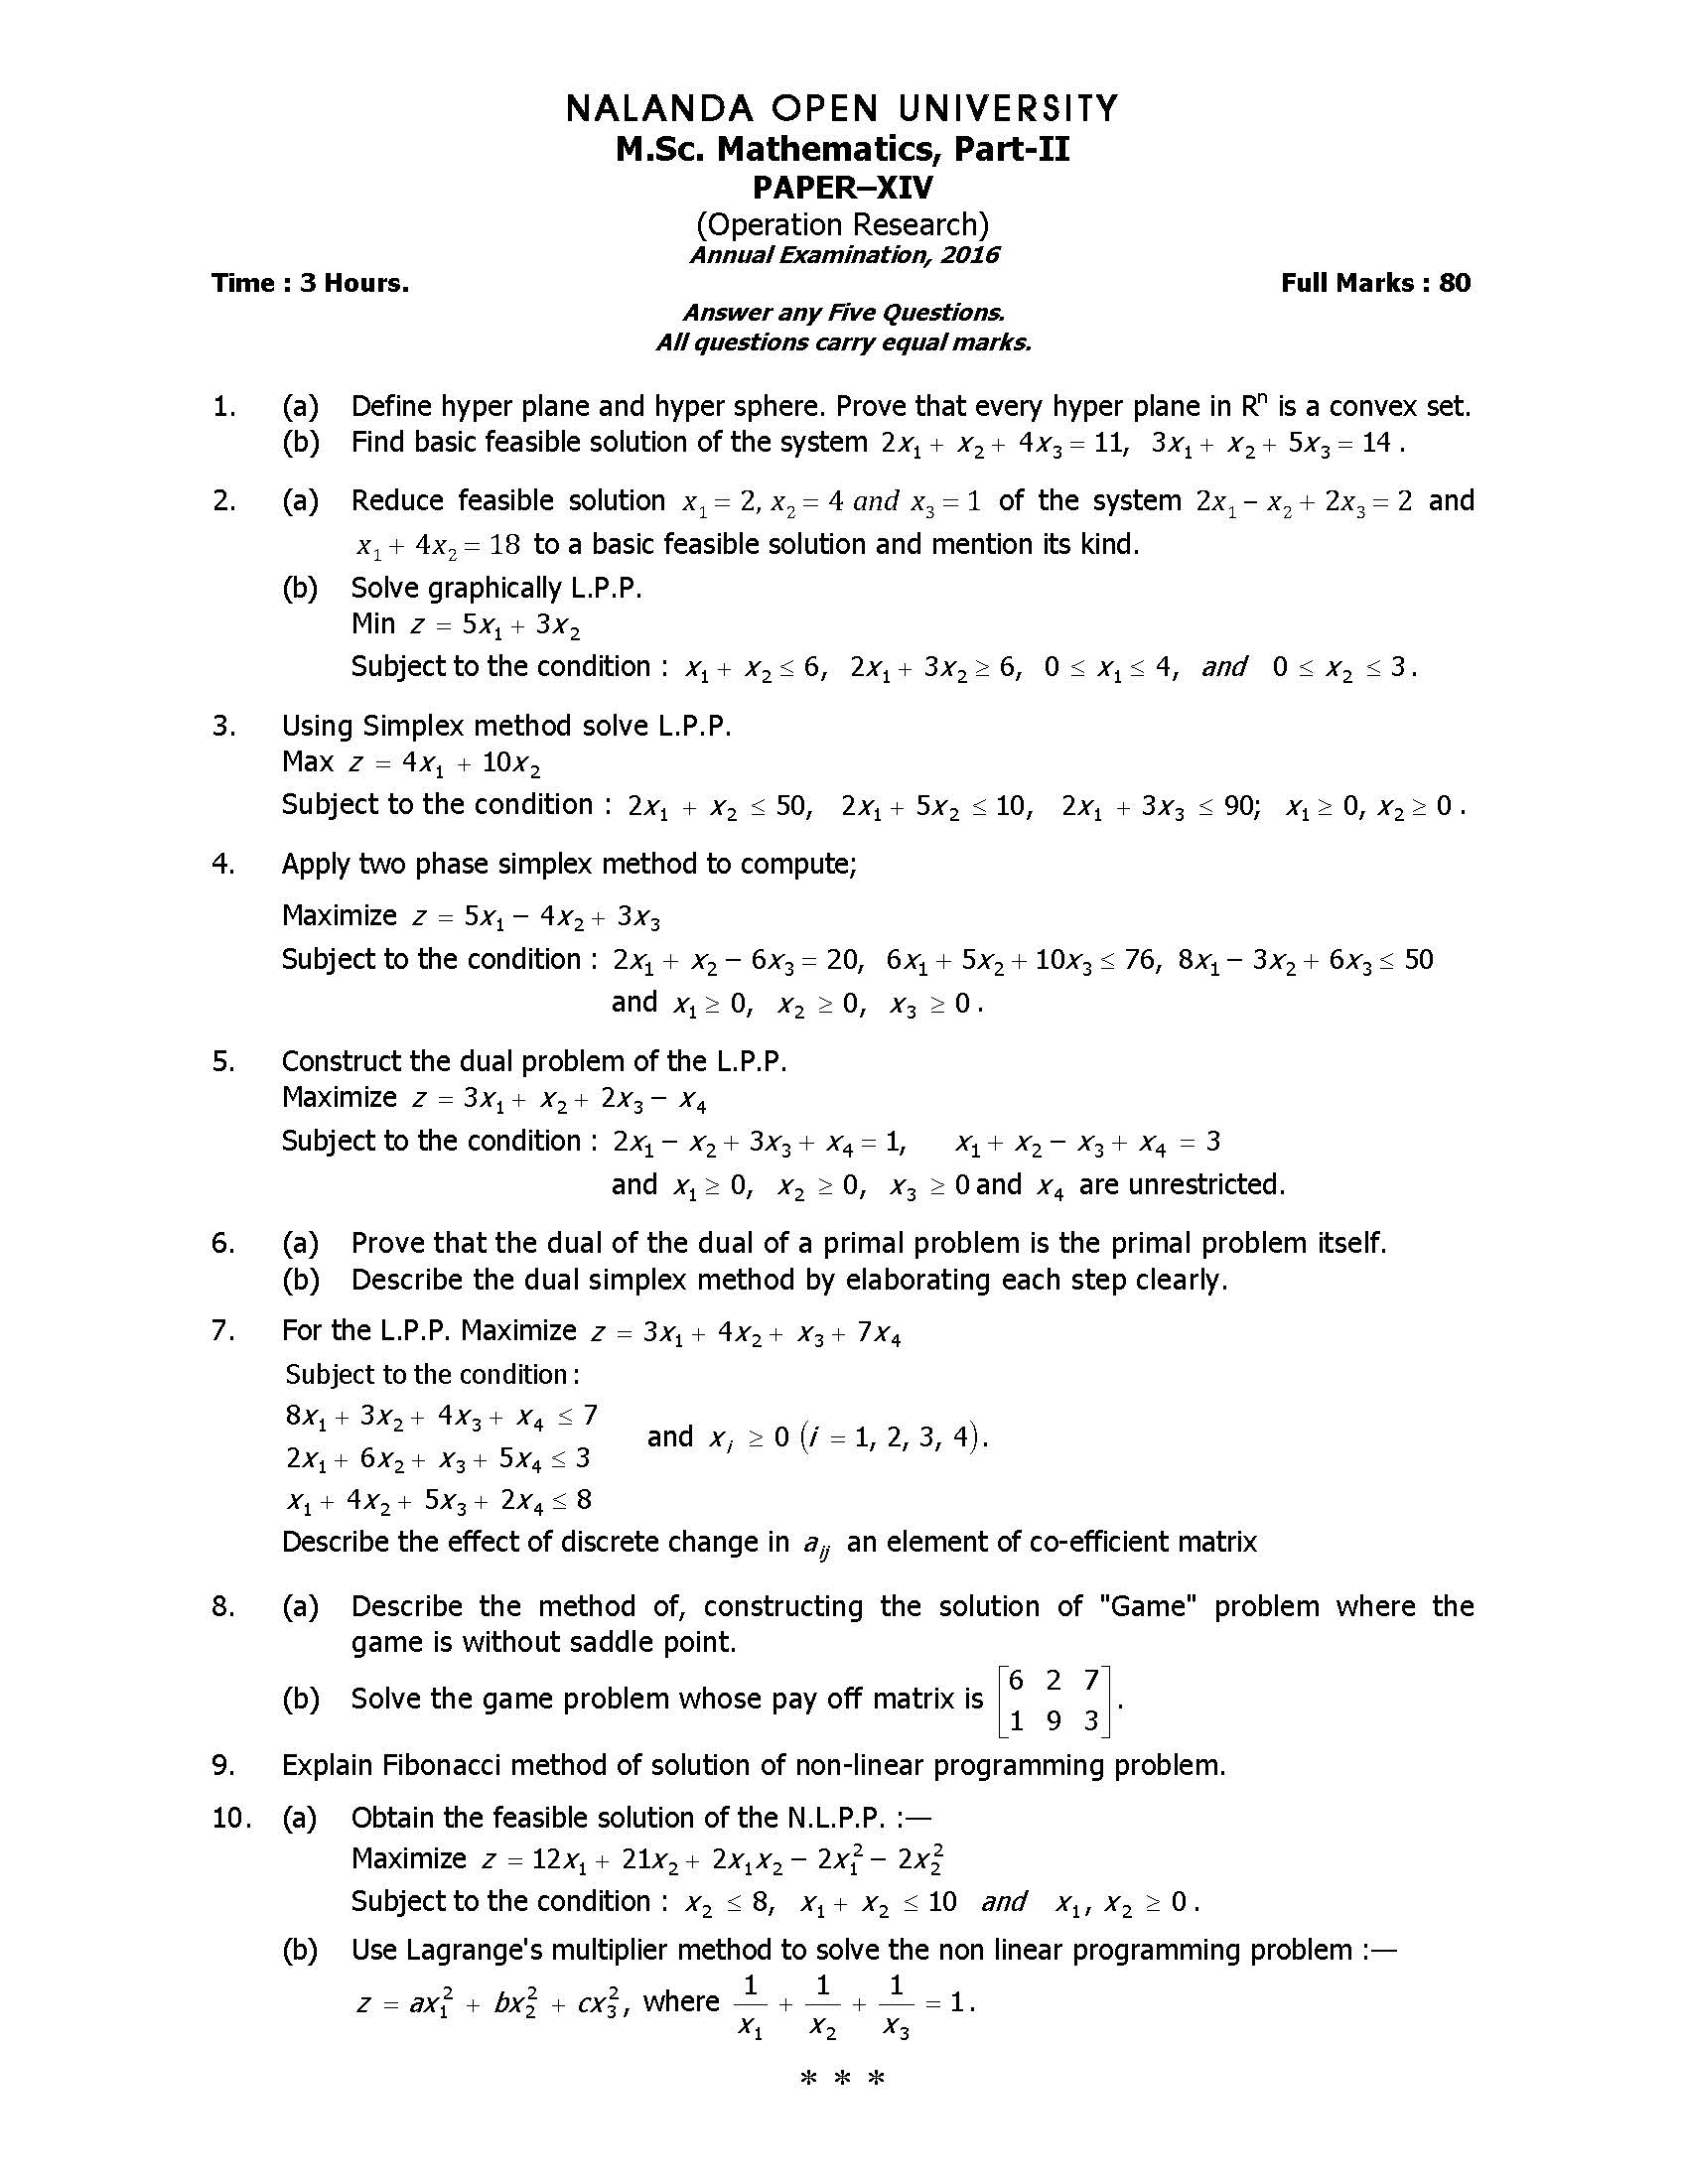 operations research previous year question papers